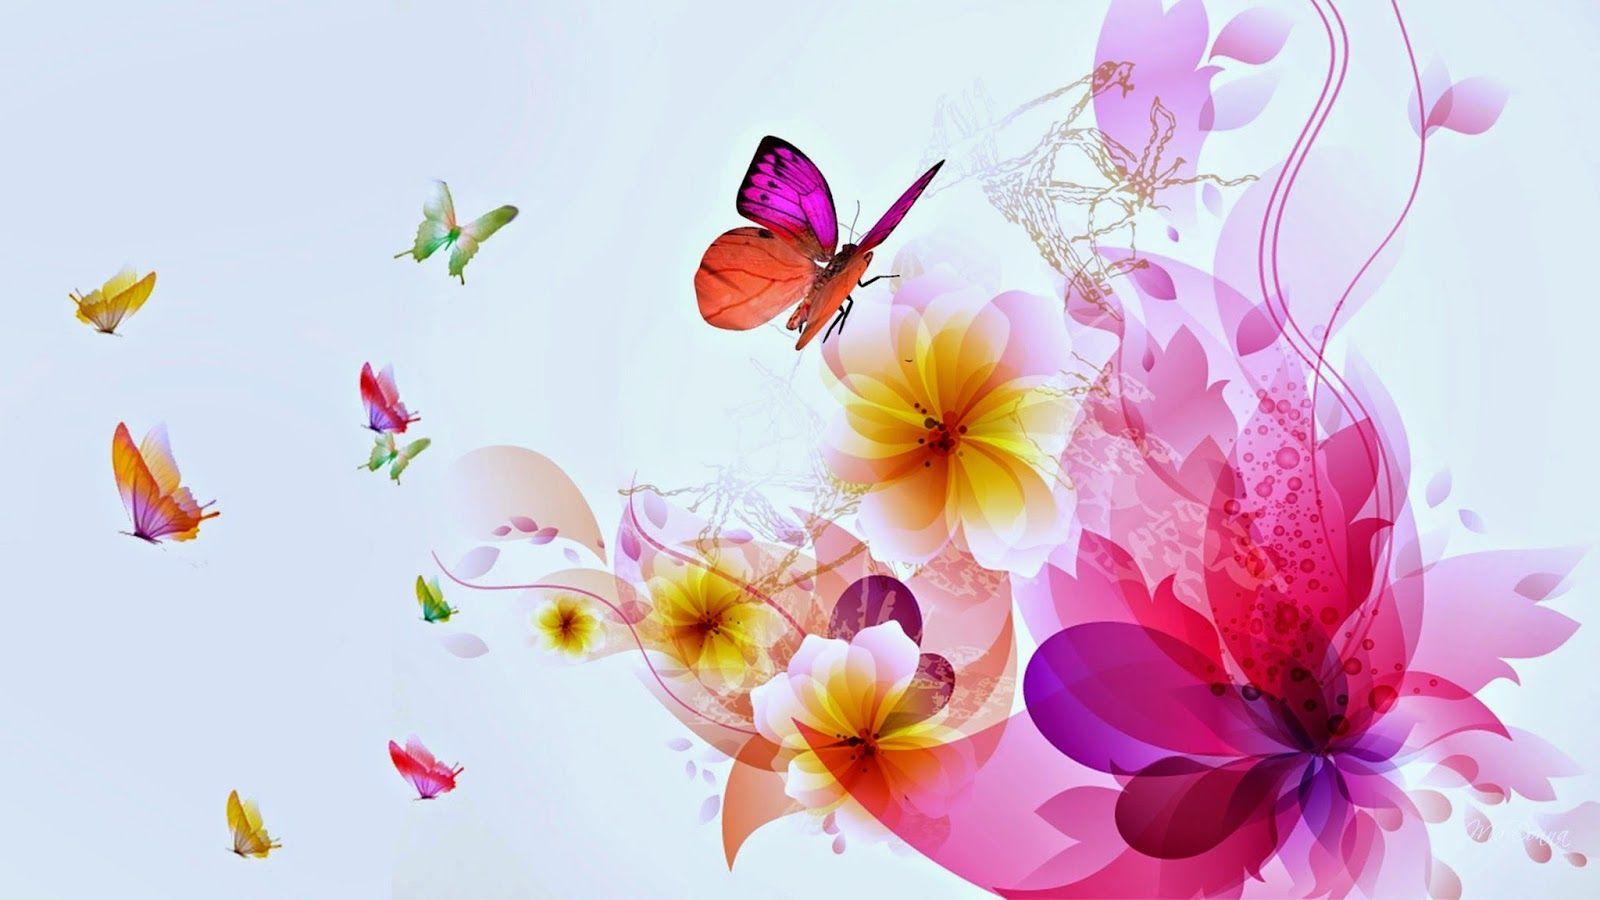 Wallpaper Of Colorful Butterflies Colorful Butterfly Designs